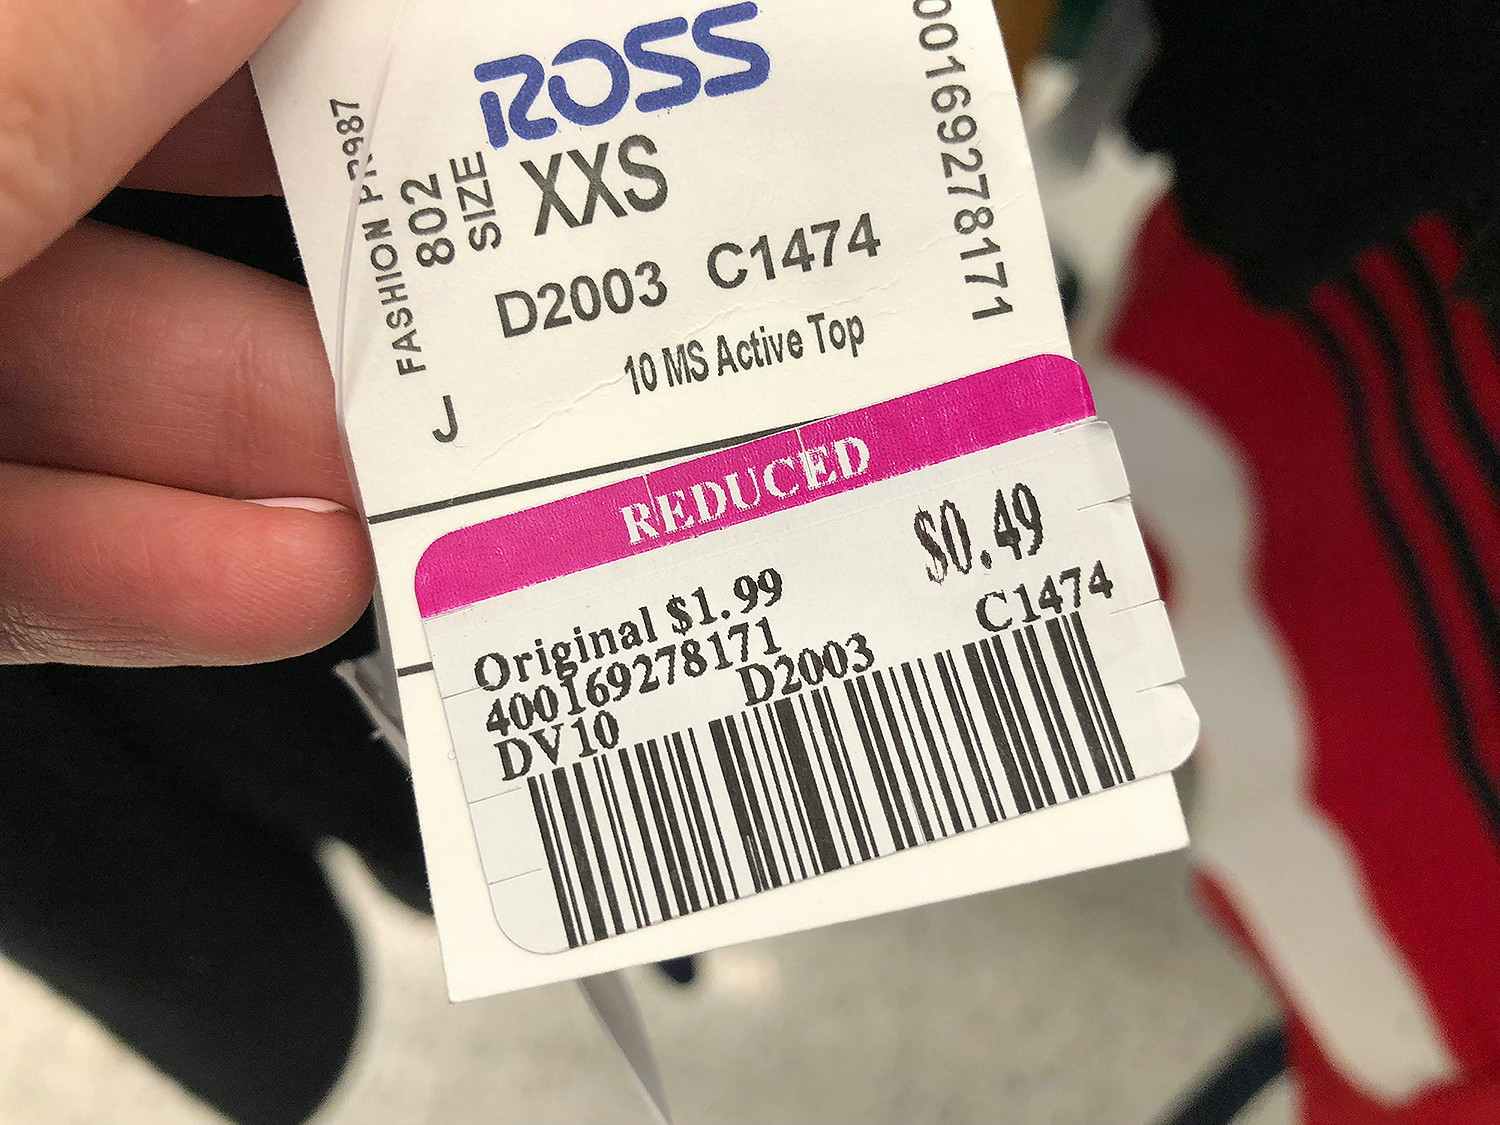 The lowest clearance price you'll ever find at Ross is $0.49